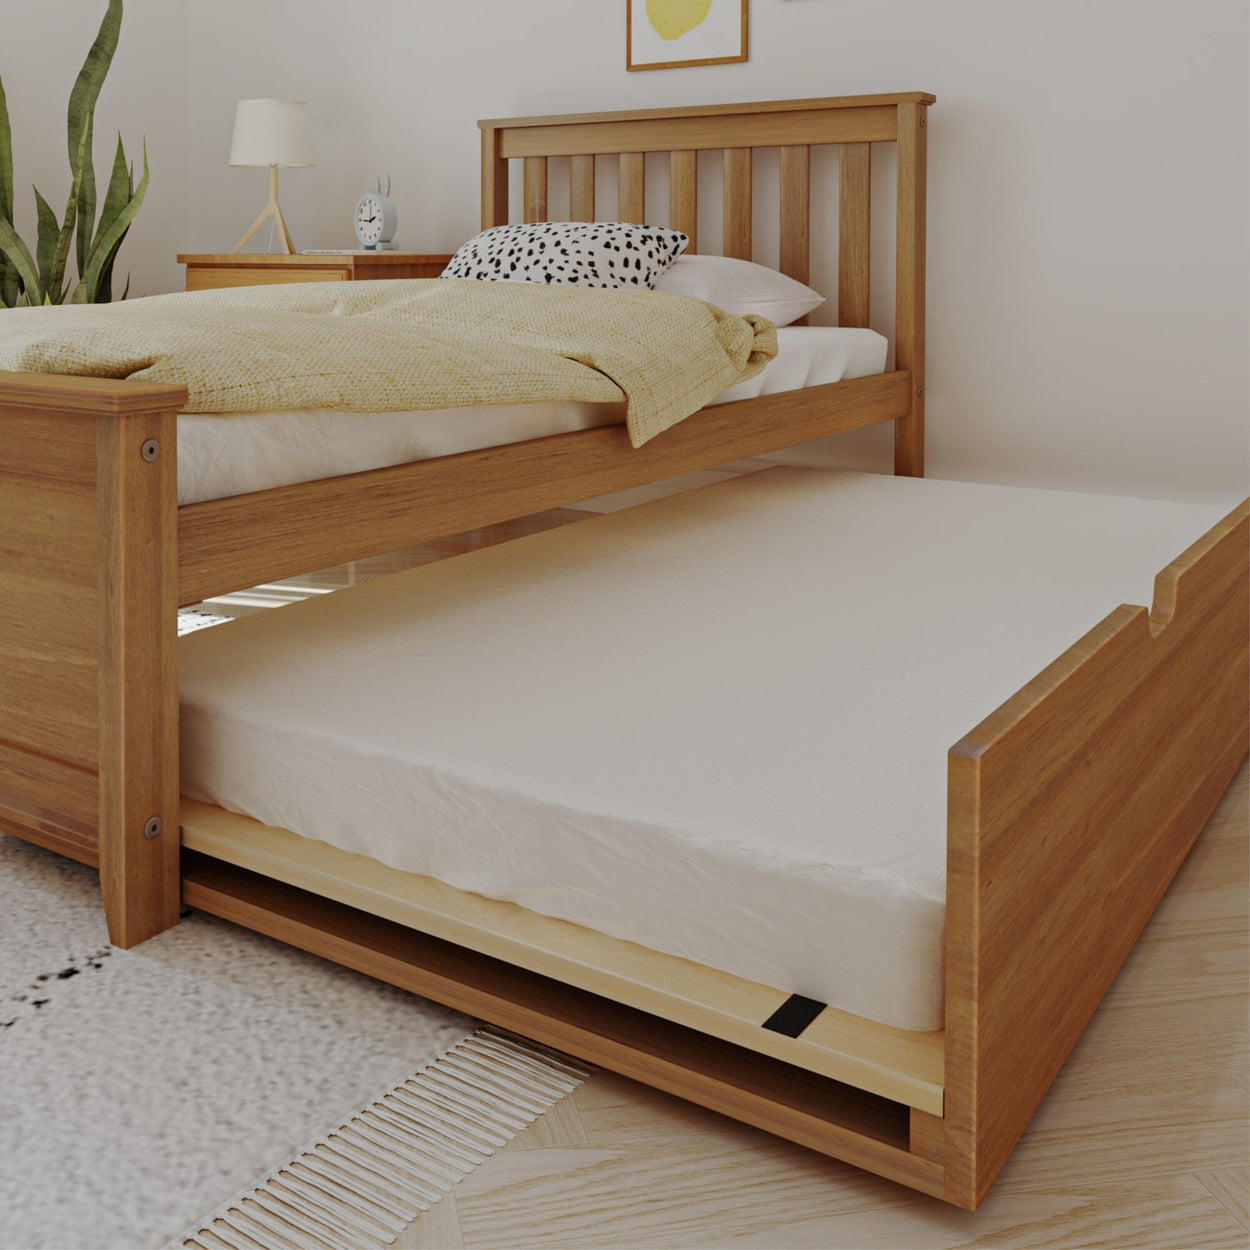 186210-007 : Kids Beds Classic Twin-Size Platform Bed with Trundle, Pecan